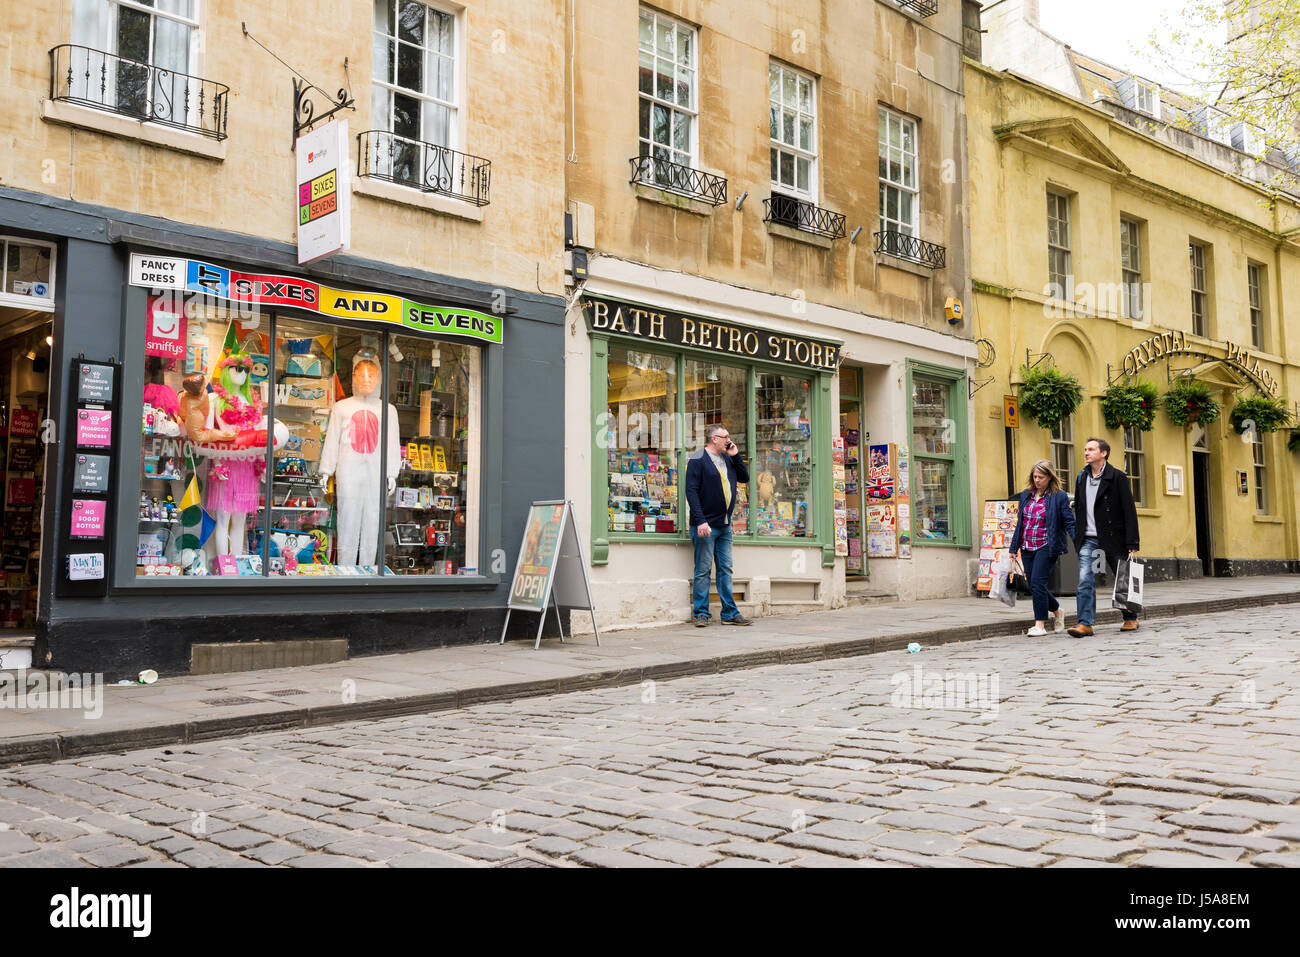 Bath Retro Store and Fancy dress shop with people walking next to them in Abbey Green, Bath, UK. Stock Photo